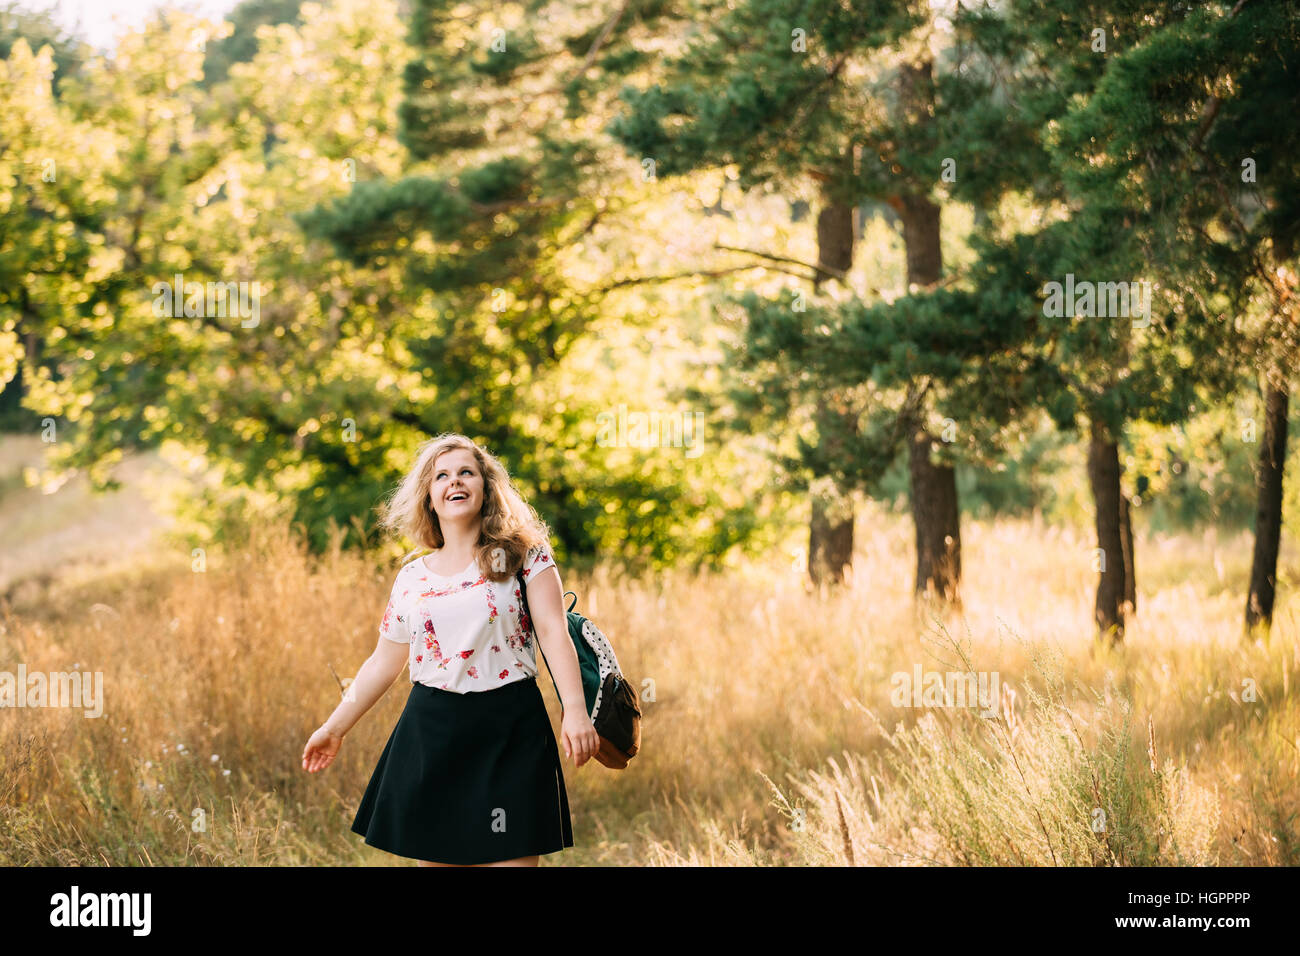 Single Young Pretty Plus Size Caucasian Happy Smiling Laughing Girl Woman In White T-Shirt, Walking With Backpack In Summer Green Forest. Fun Enjoy Ou Stock Photo